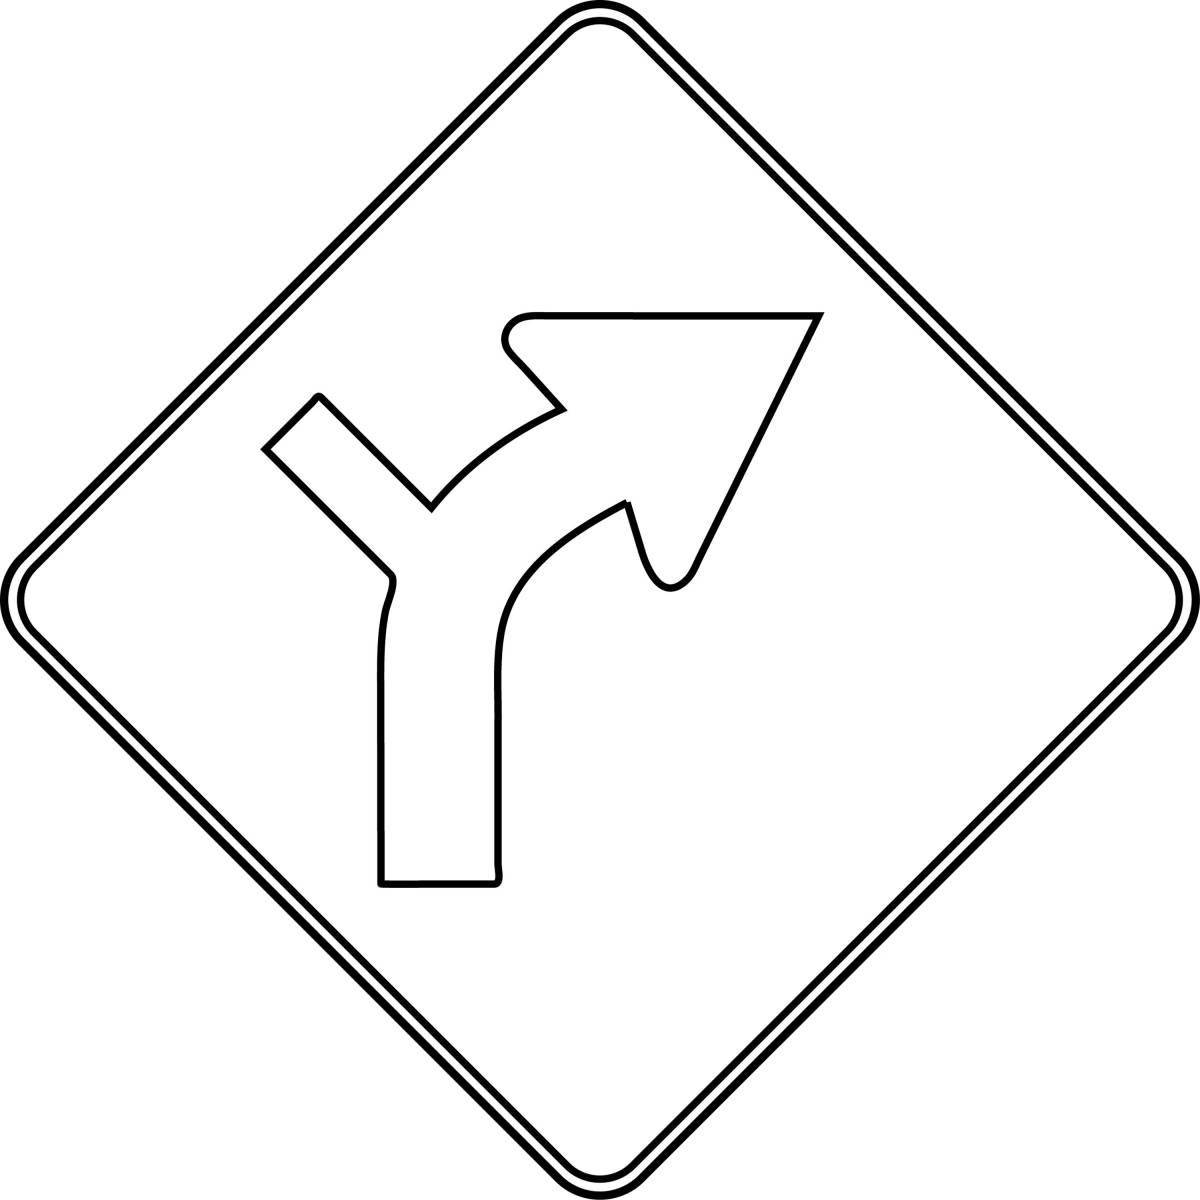 Coloring page cheerful give way sign